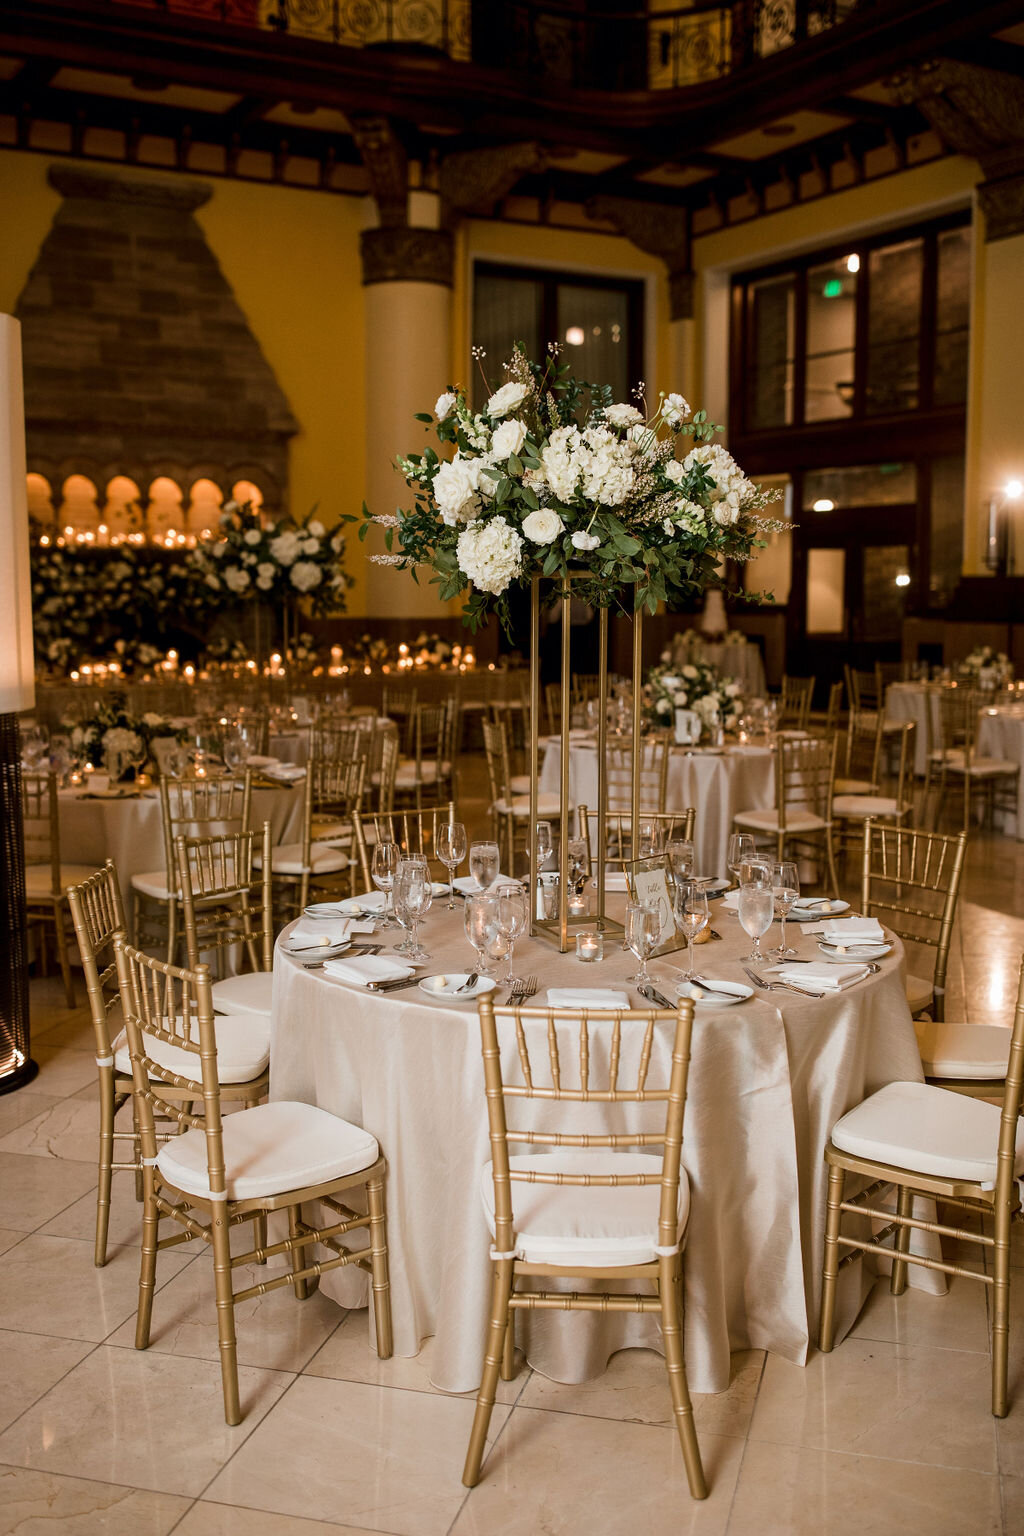 Elevated gold stands with lush floral centerpieces of white garden roses, ranunculus, snapdragons, and natural, untamed greenery. Nashville wedding florist at Union Station.